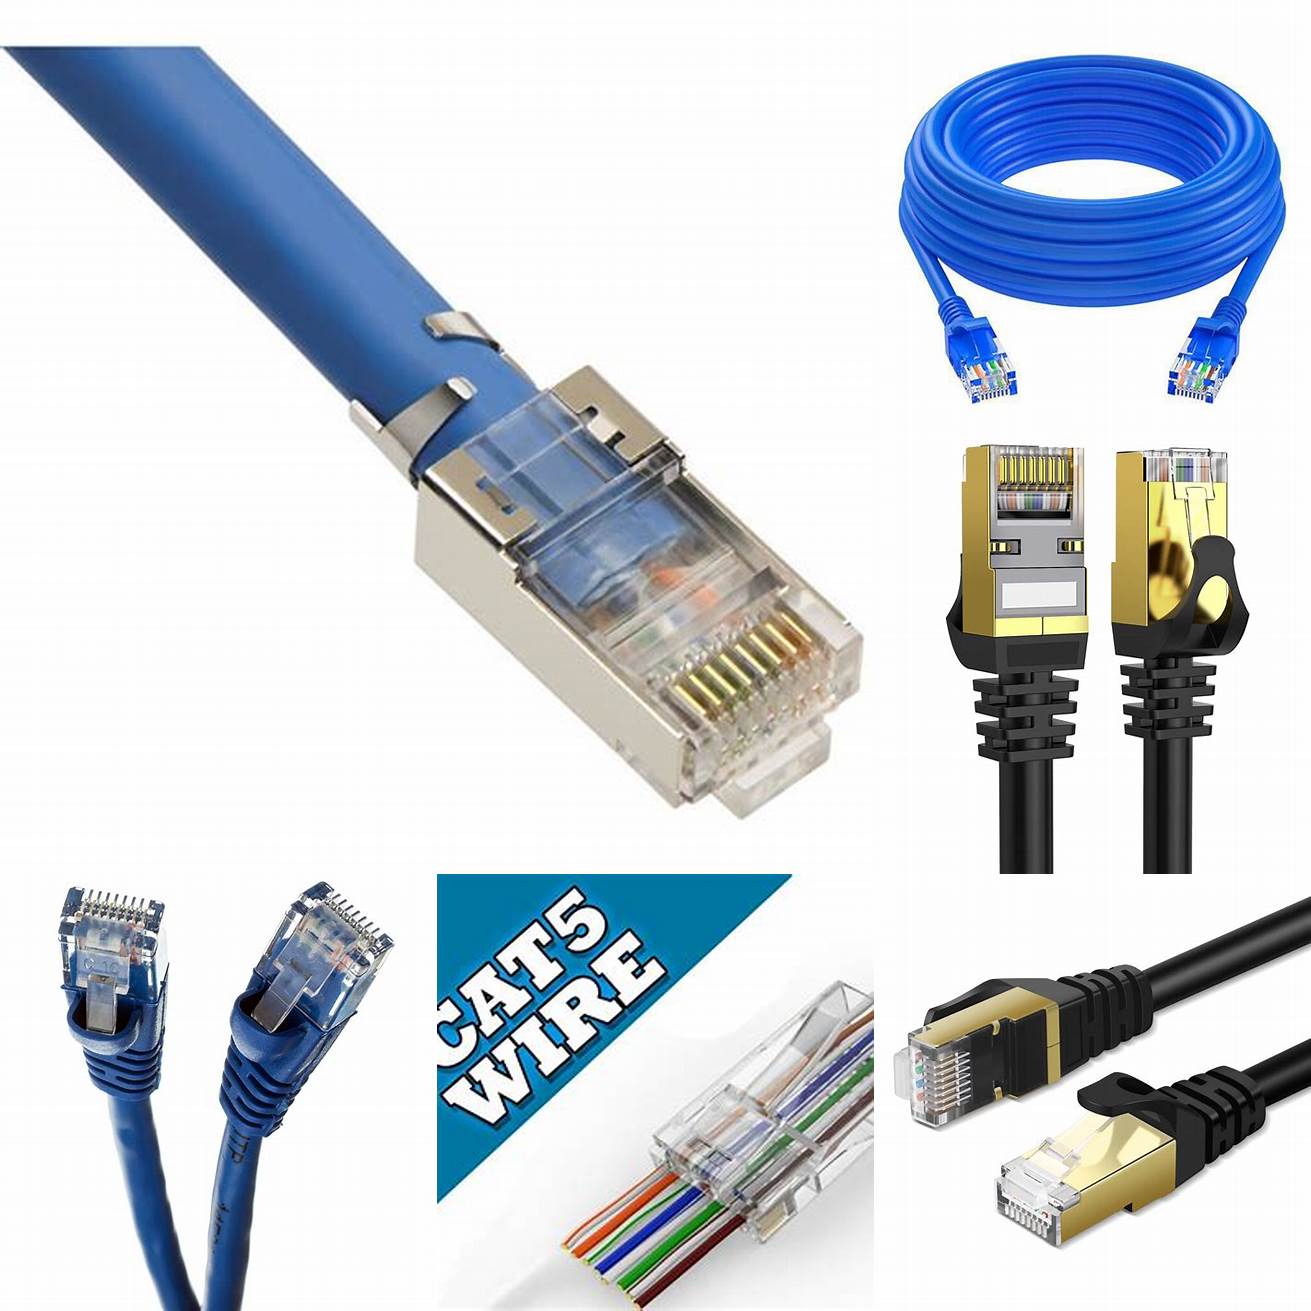 Use high-quality cables and connectors